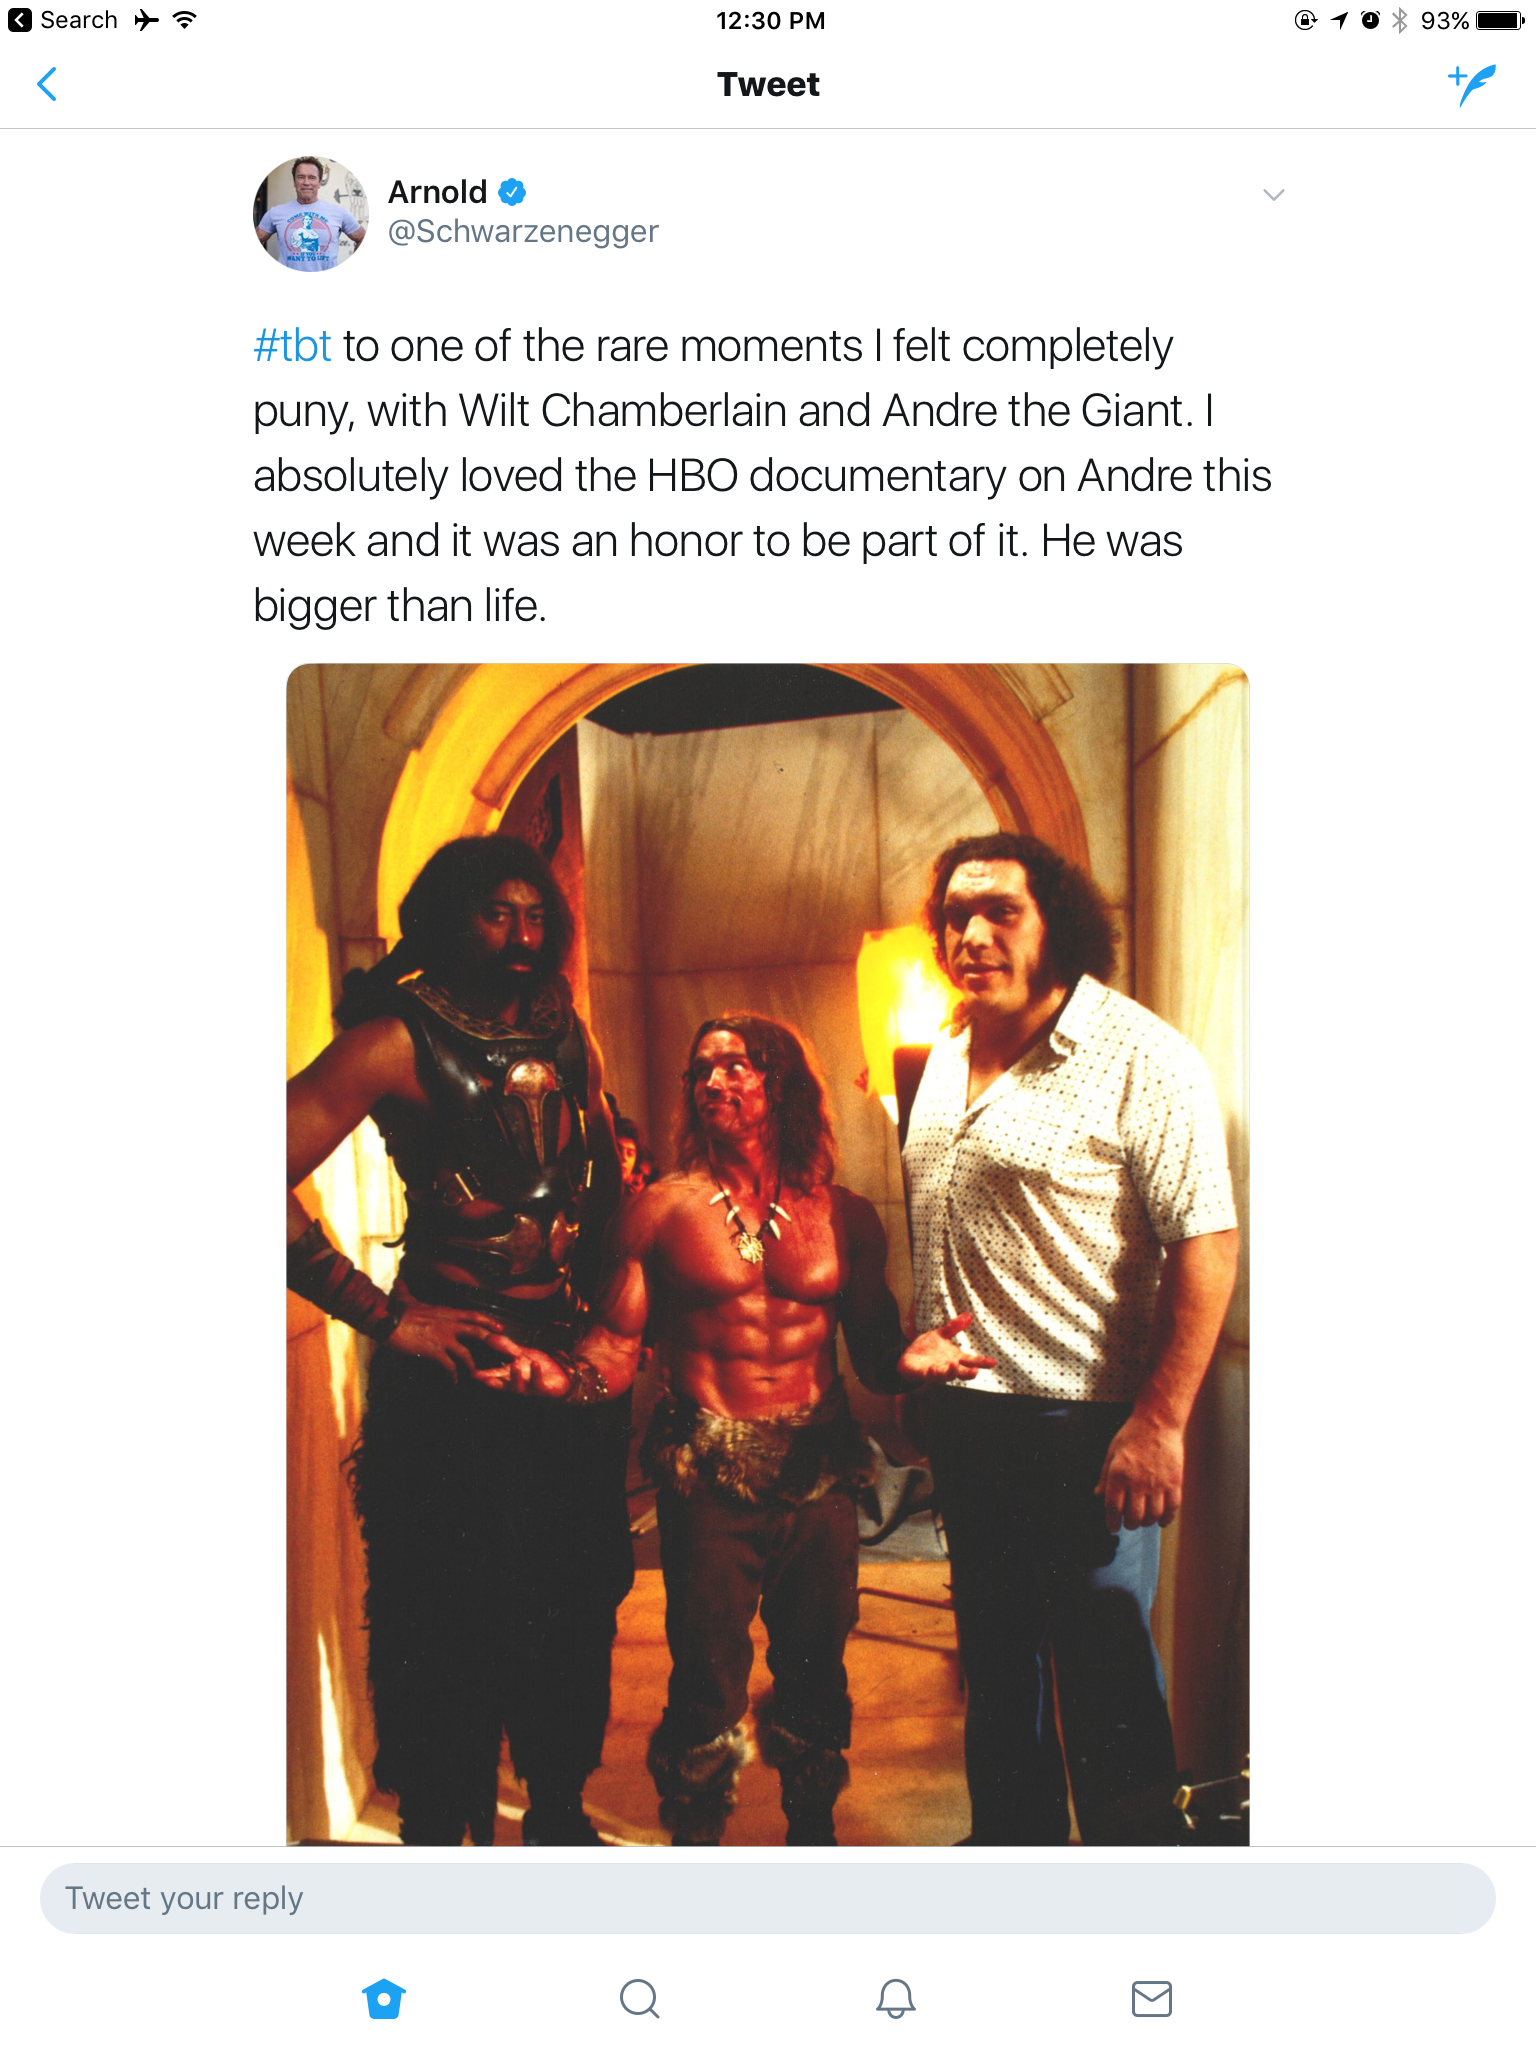 andre the giant arnold schwarzenegger wilt chamberlain - 1230 Pm Tweet Arnold Schwarzenegger to one of the rare moments I felt completely puny, with Wilt Chamberlain and Andre the Giant. absolutely loved the Hbo documentary on Andre this week and it was a